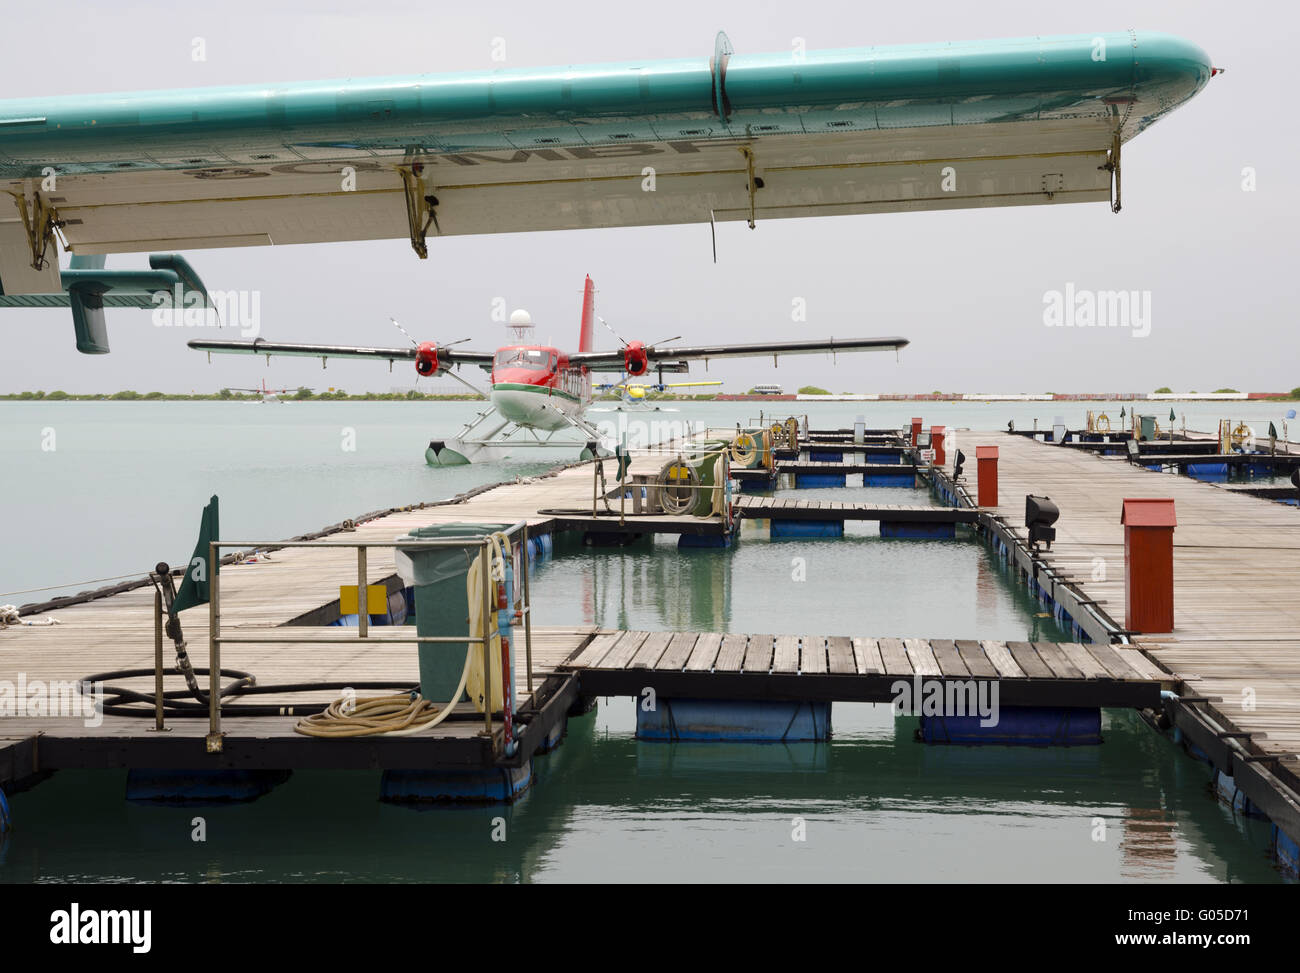 Seaplanes at the airport in Male Maldives Stock Photo